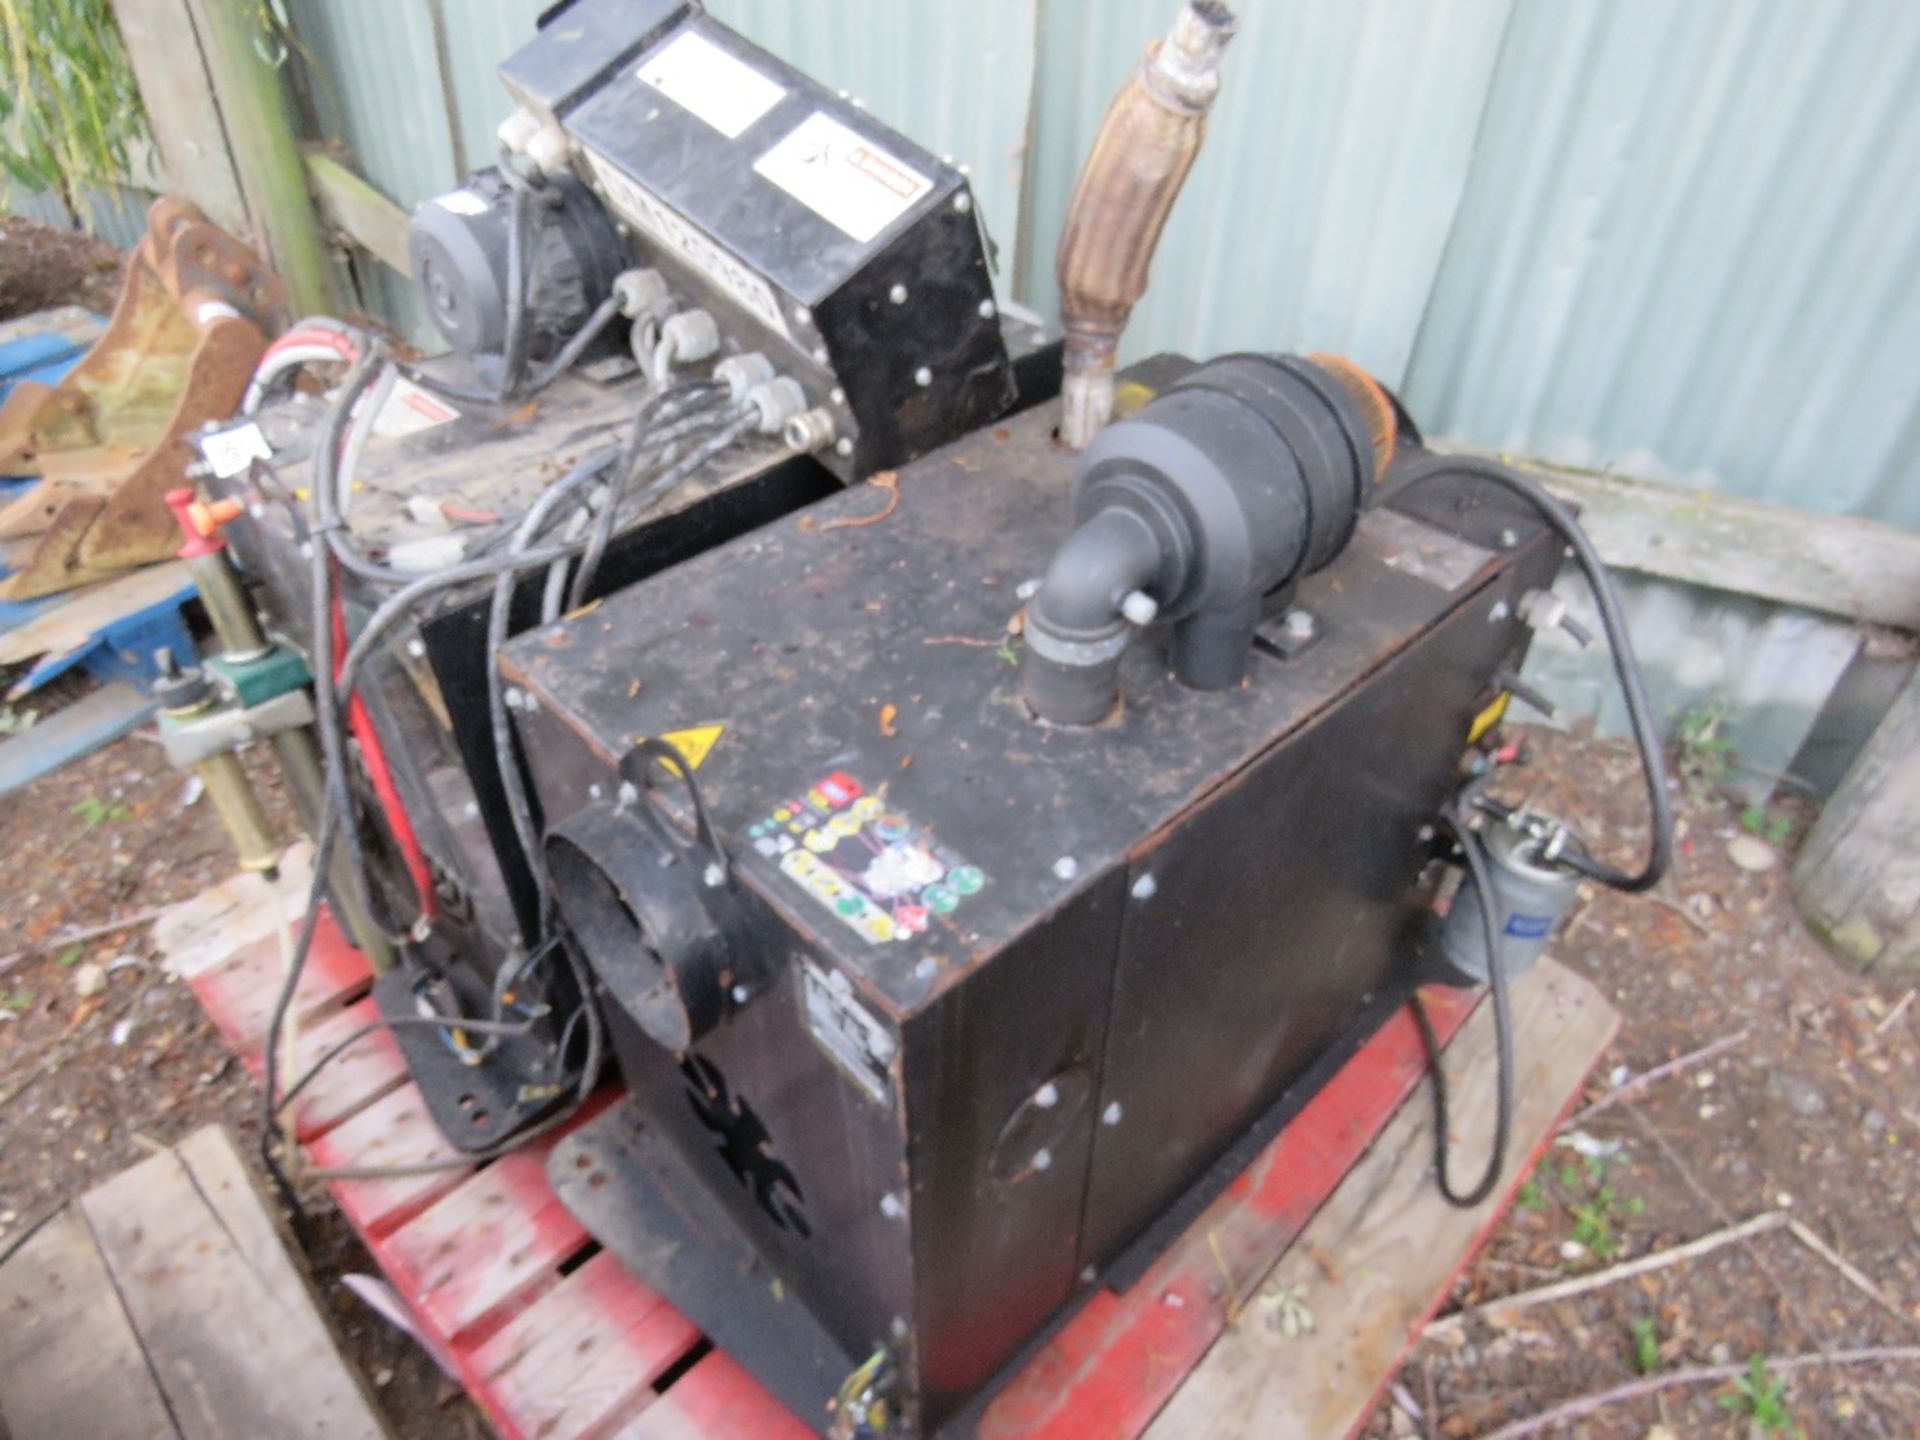 2 X HATZ DIESEL ENGINED GENERATOR SETS, 3.1KW OUTPUT. EX LIGHTING TOWERS. - Image 5 of 5